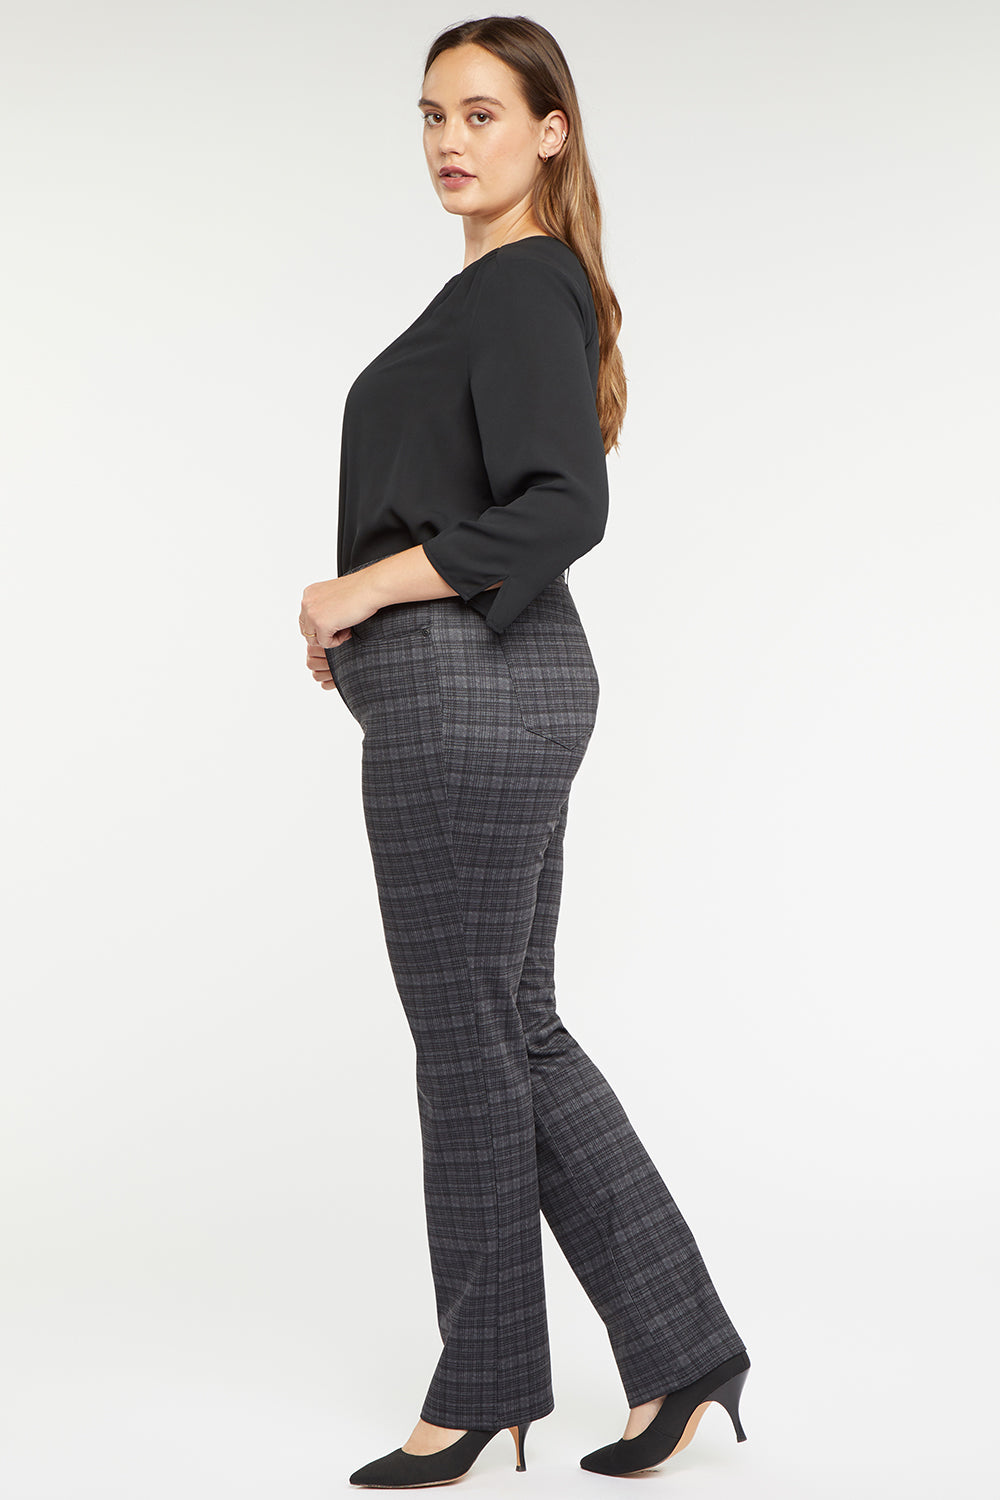 Black Ponte Stretch Trousers | Yours Clothing